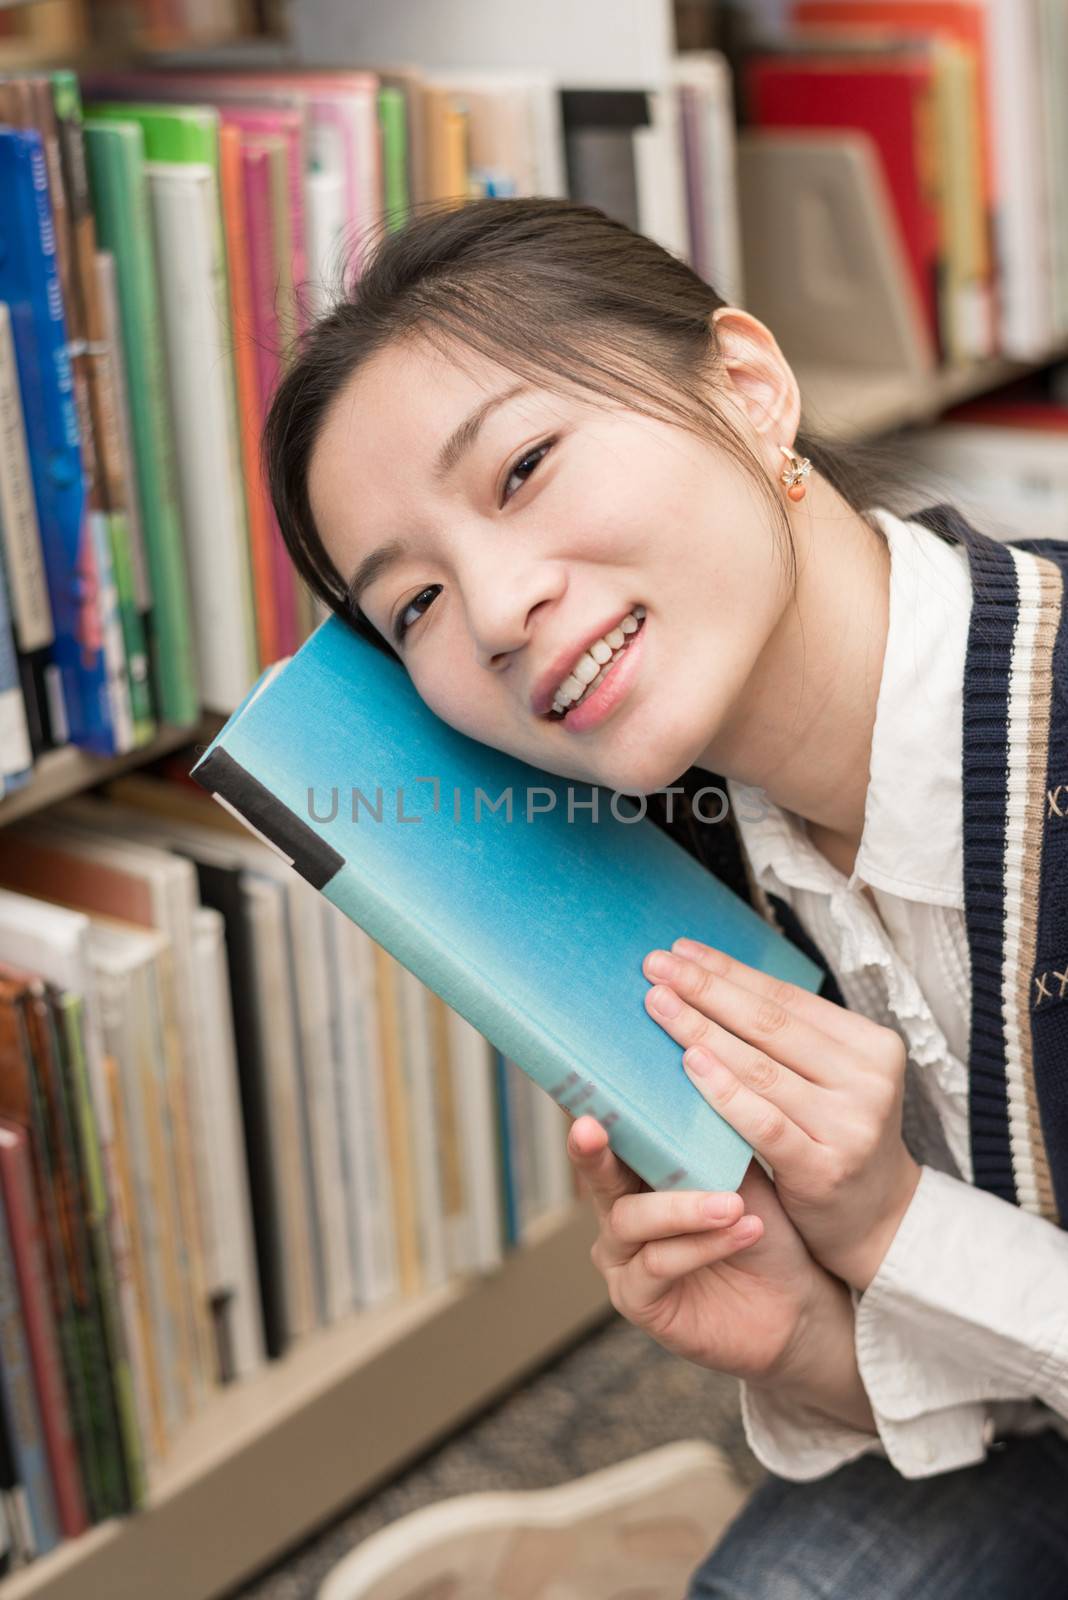 Portrait of young girl holding a blue book against her face next to a bookshelf